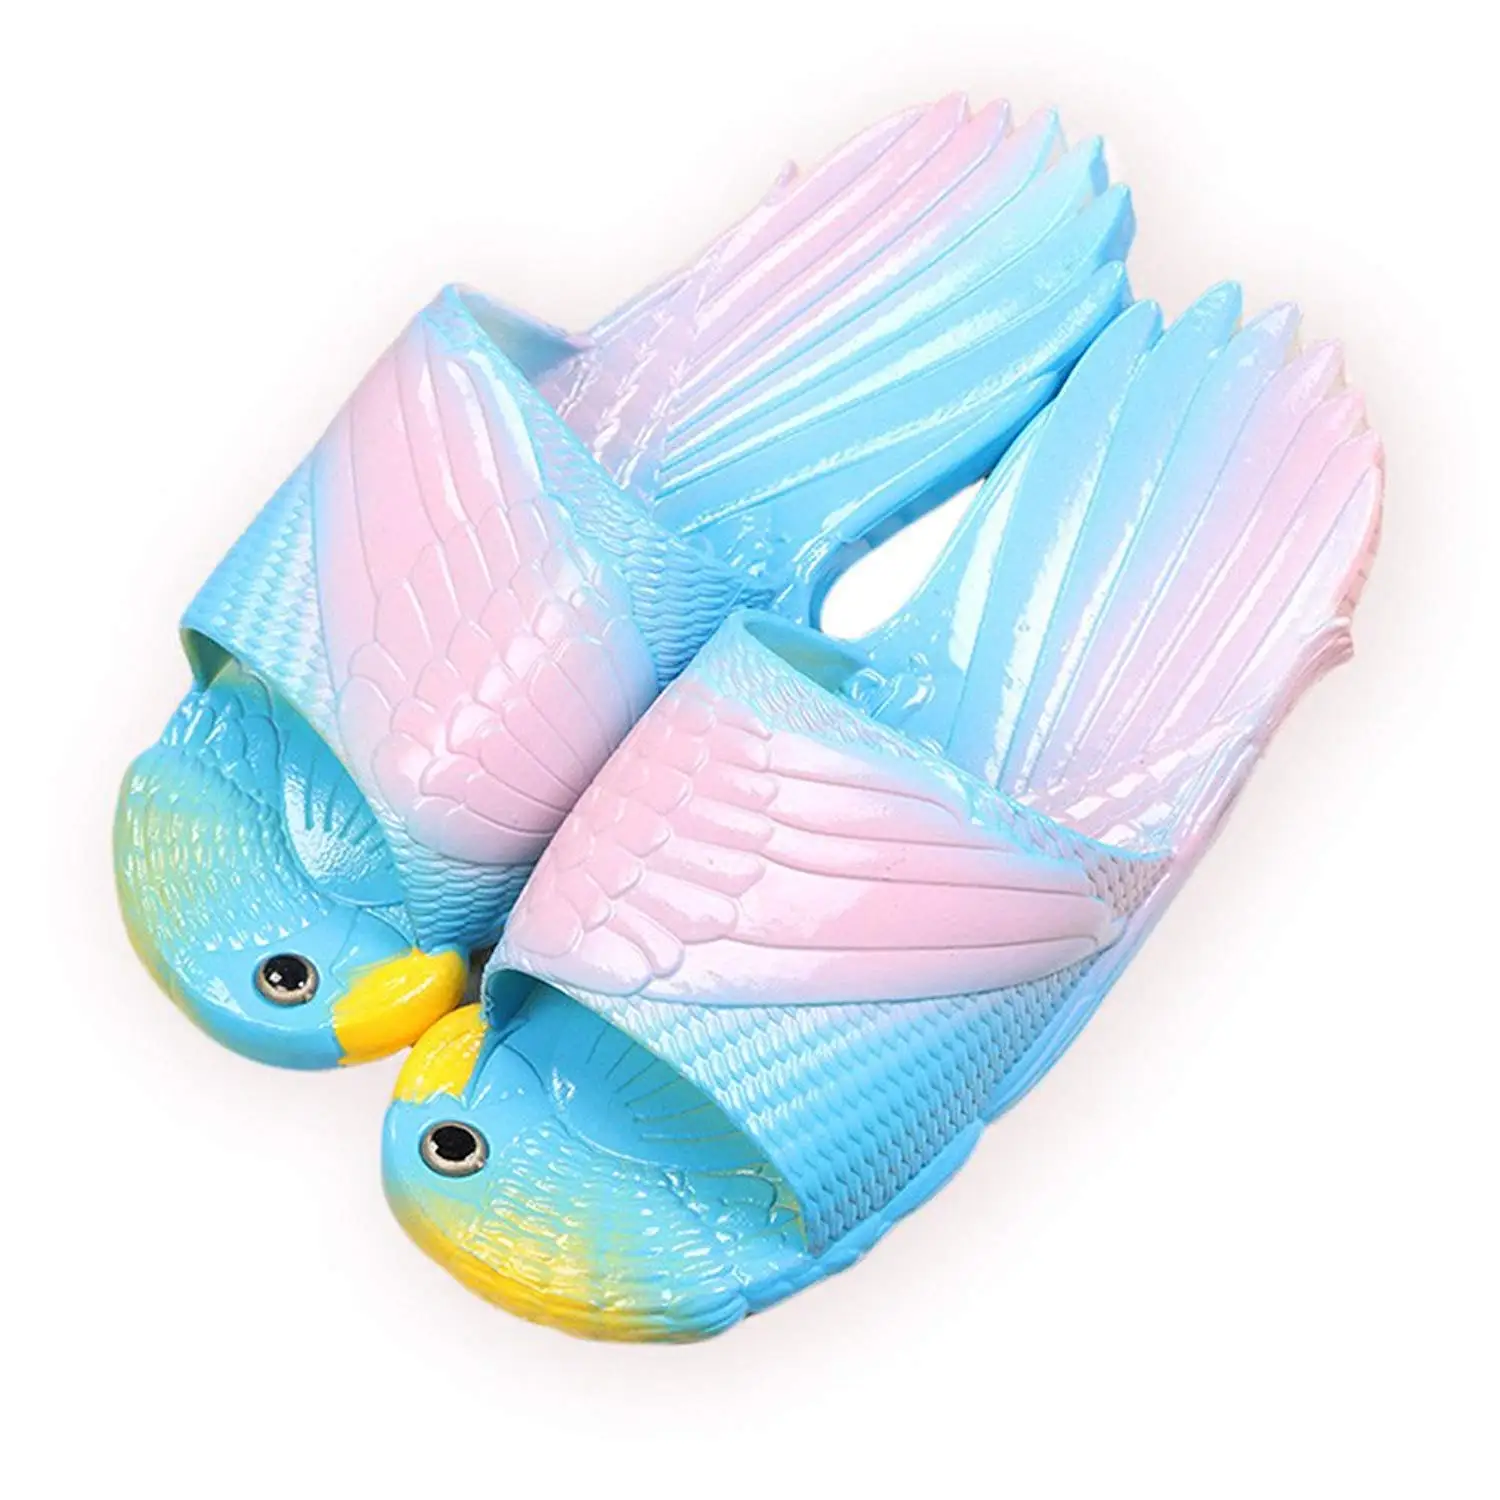 big bird slippers for adults